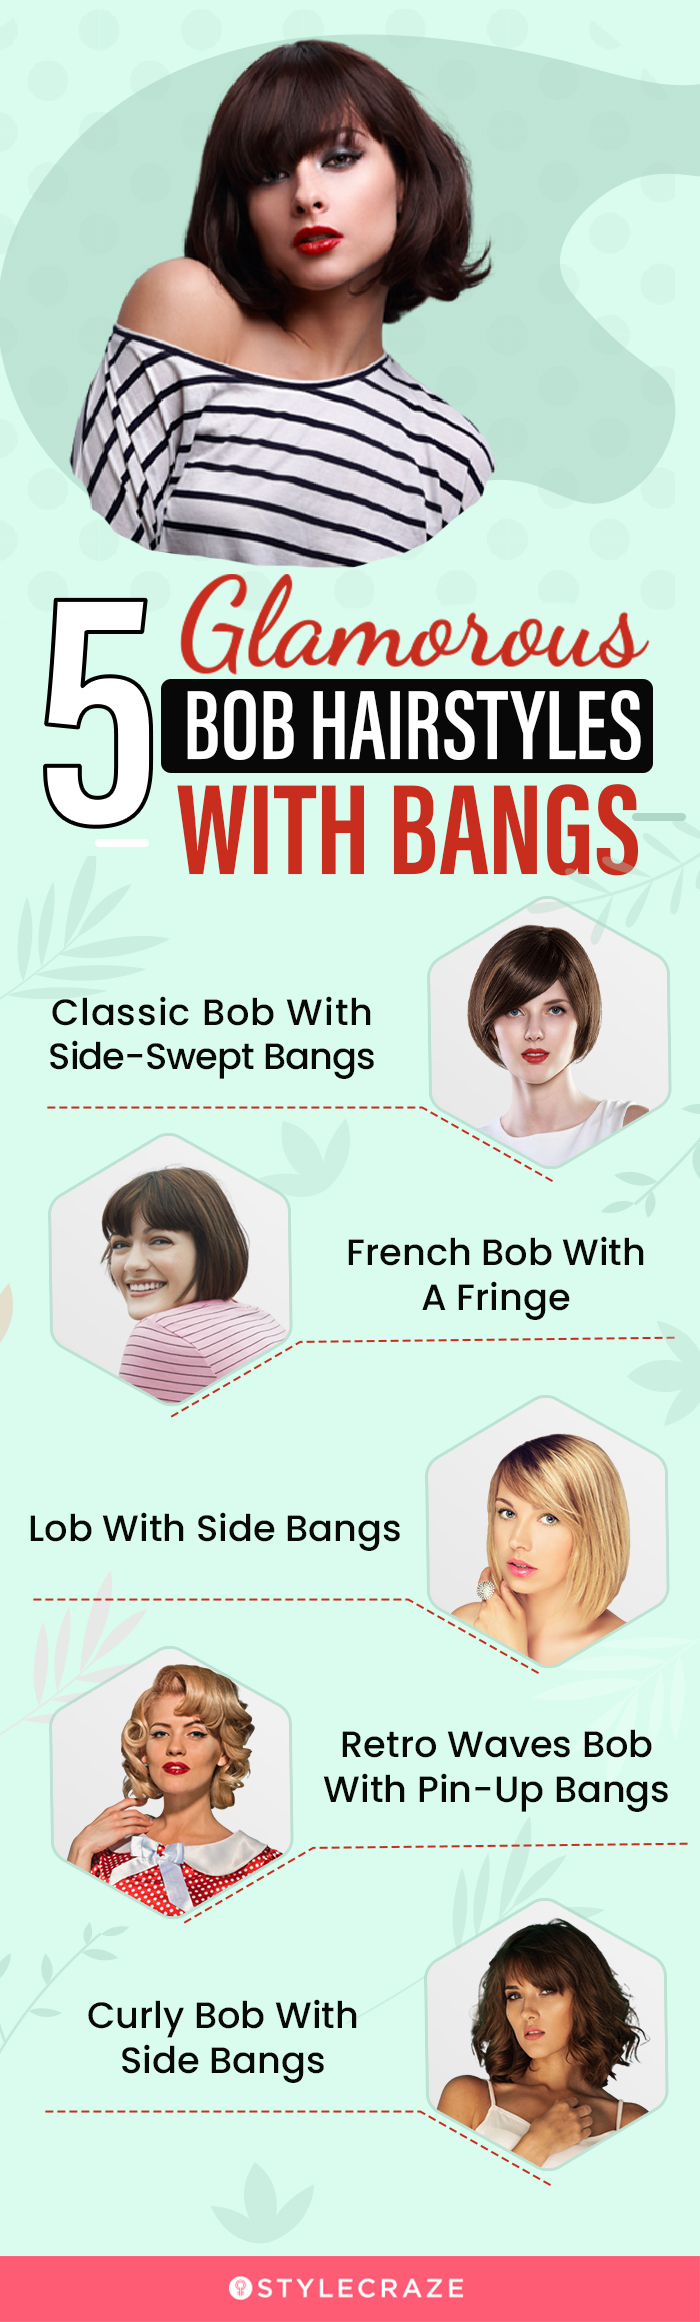 5 glamorous bob hairstyles with bangs [infographic]